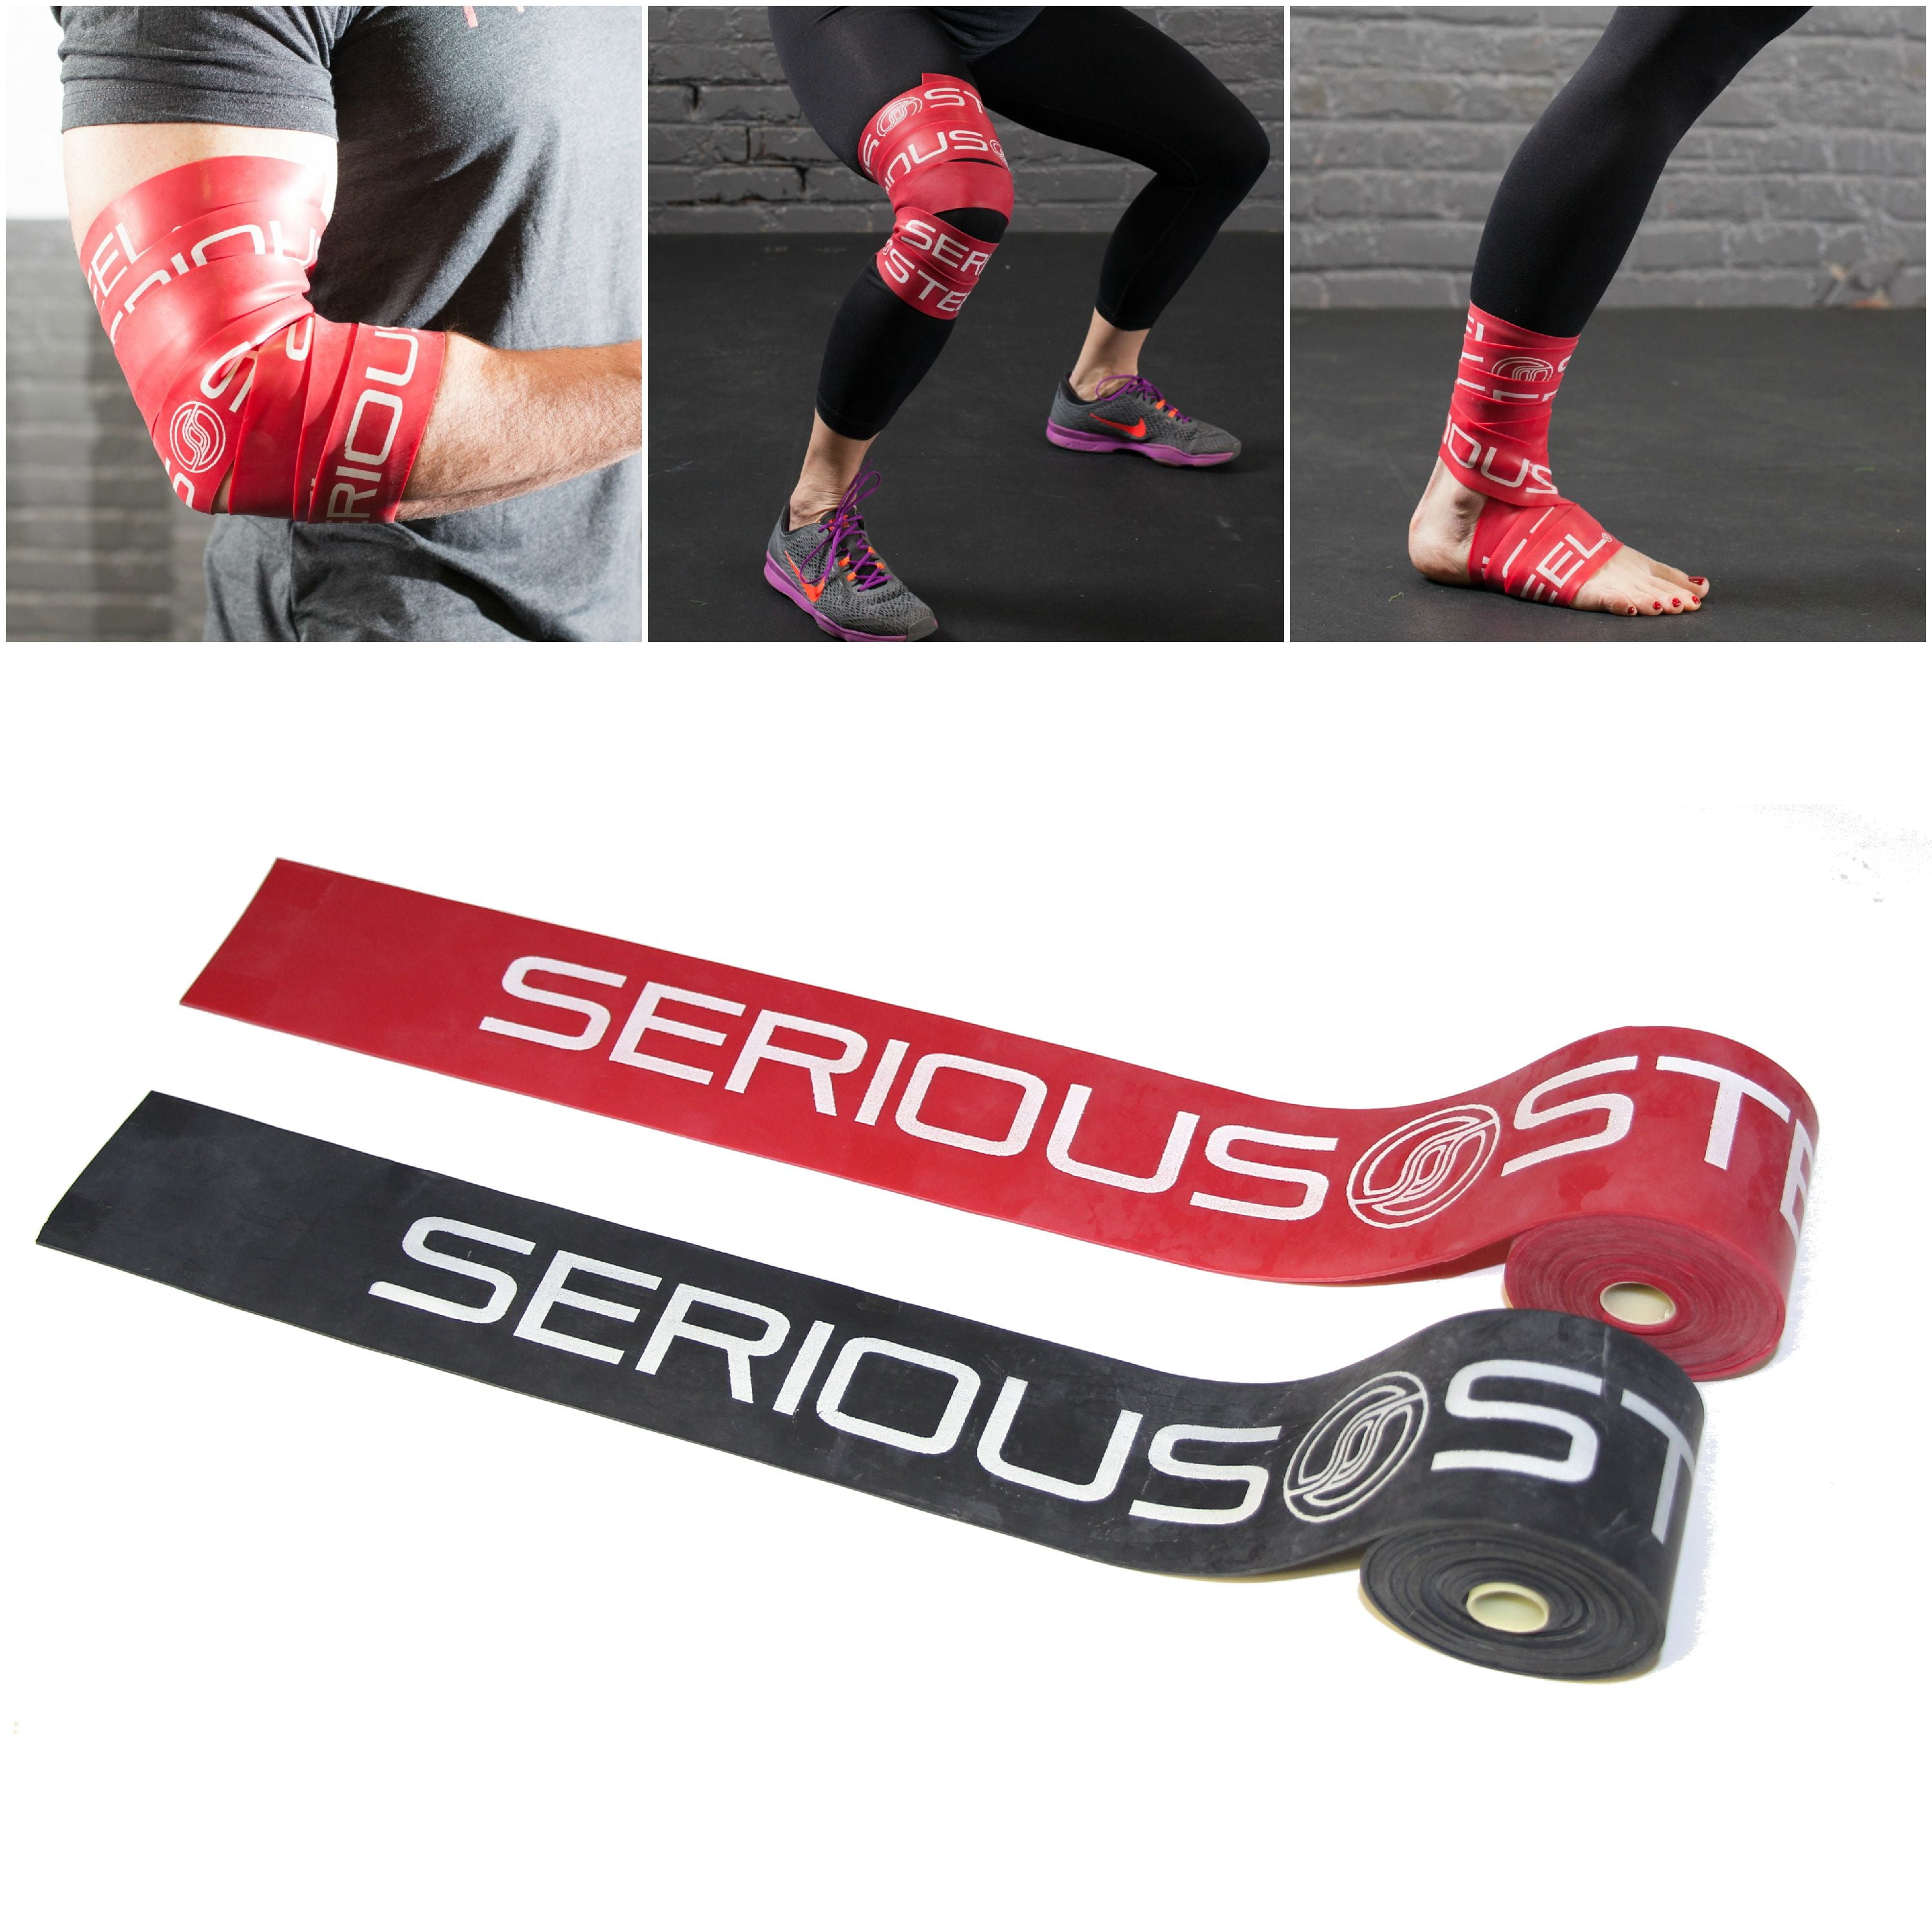 Warming Mussion Bands POWER GUIDANCE Half Price Deal Floss Bands Increasing Circulation & Reducing Soreness for Improving Movement - Compression Bands 2 Pack cles Mobility & Recovery Bands